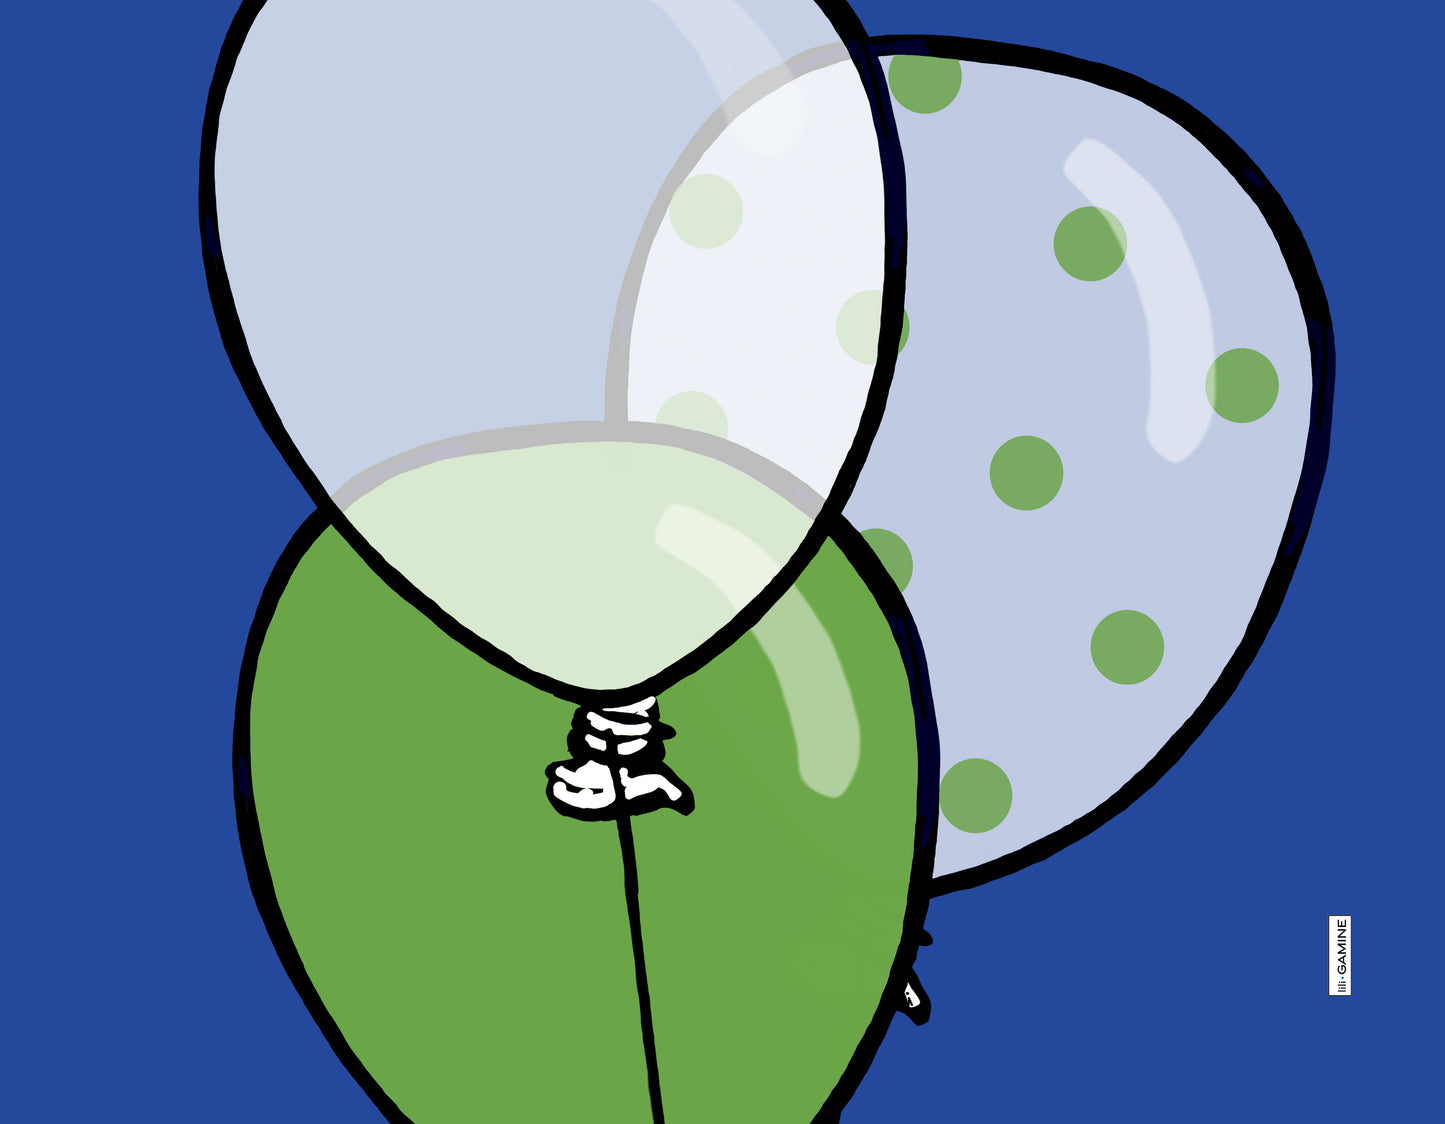 Green Balloons on a Blue Background